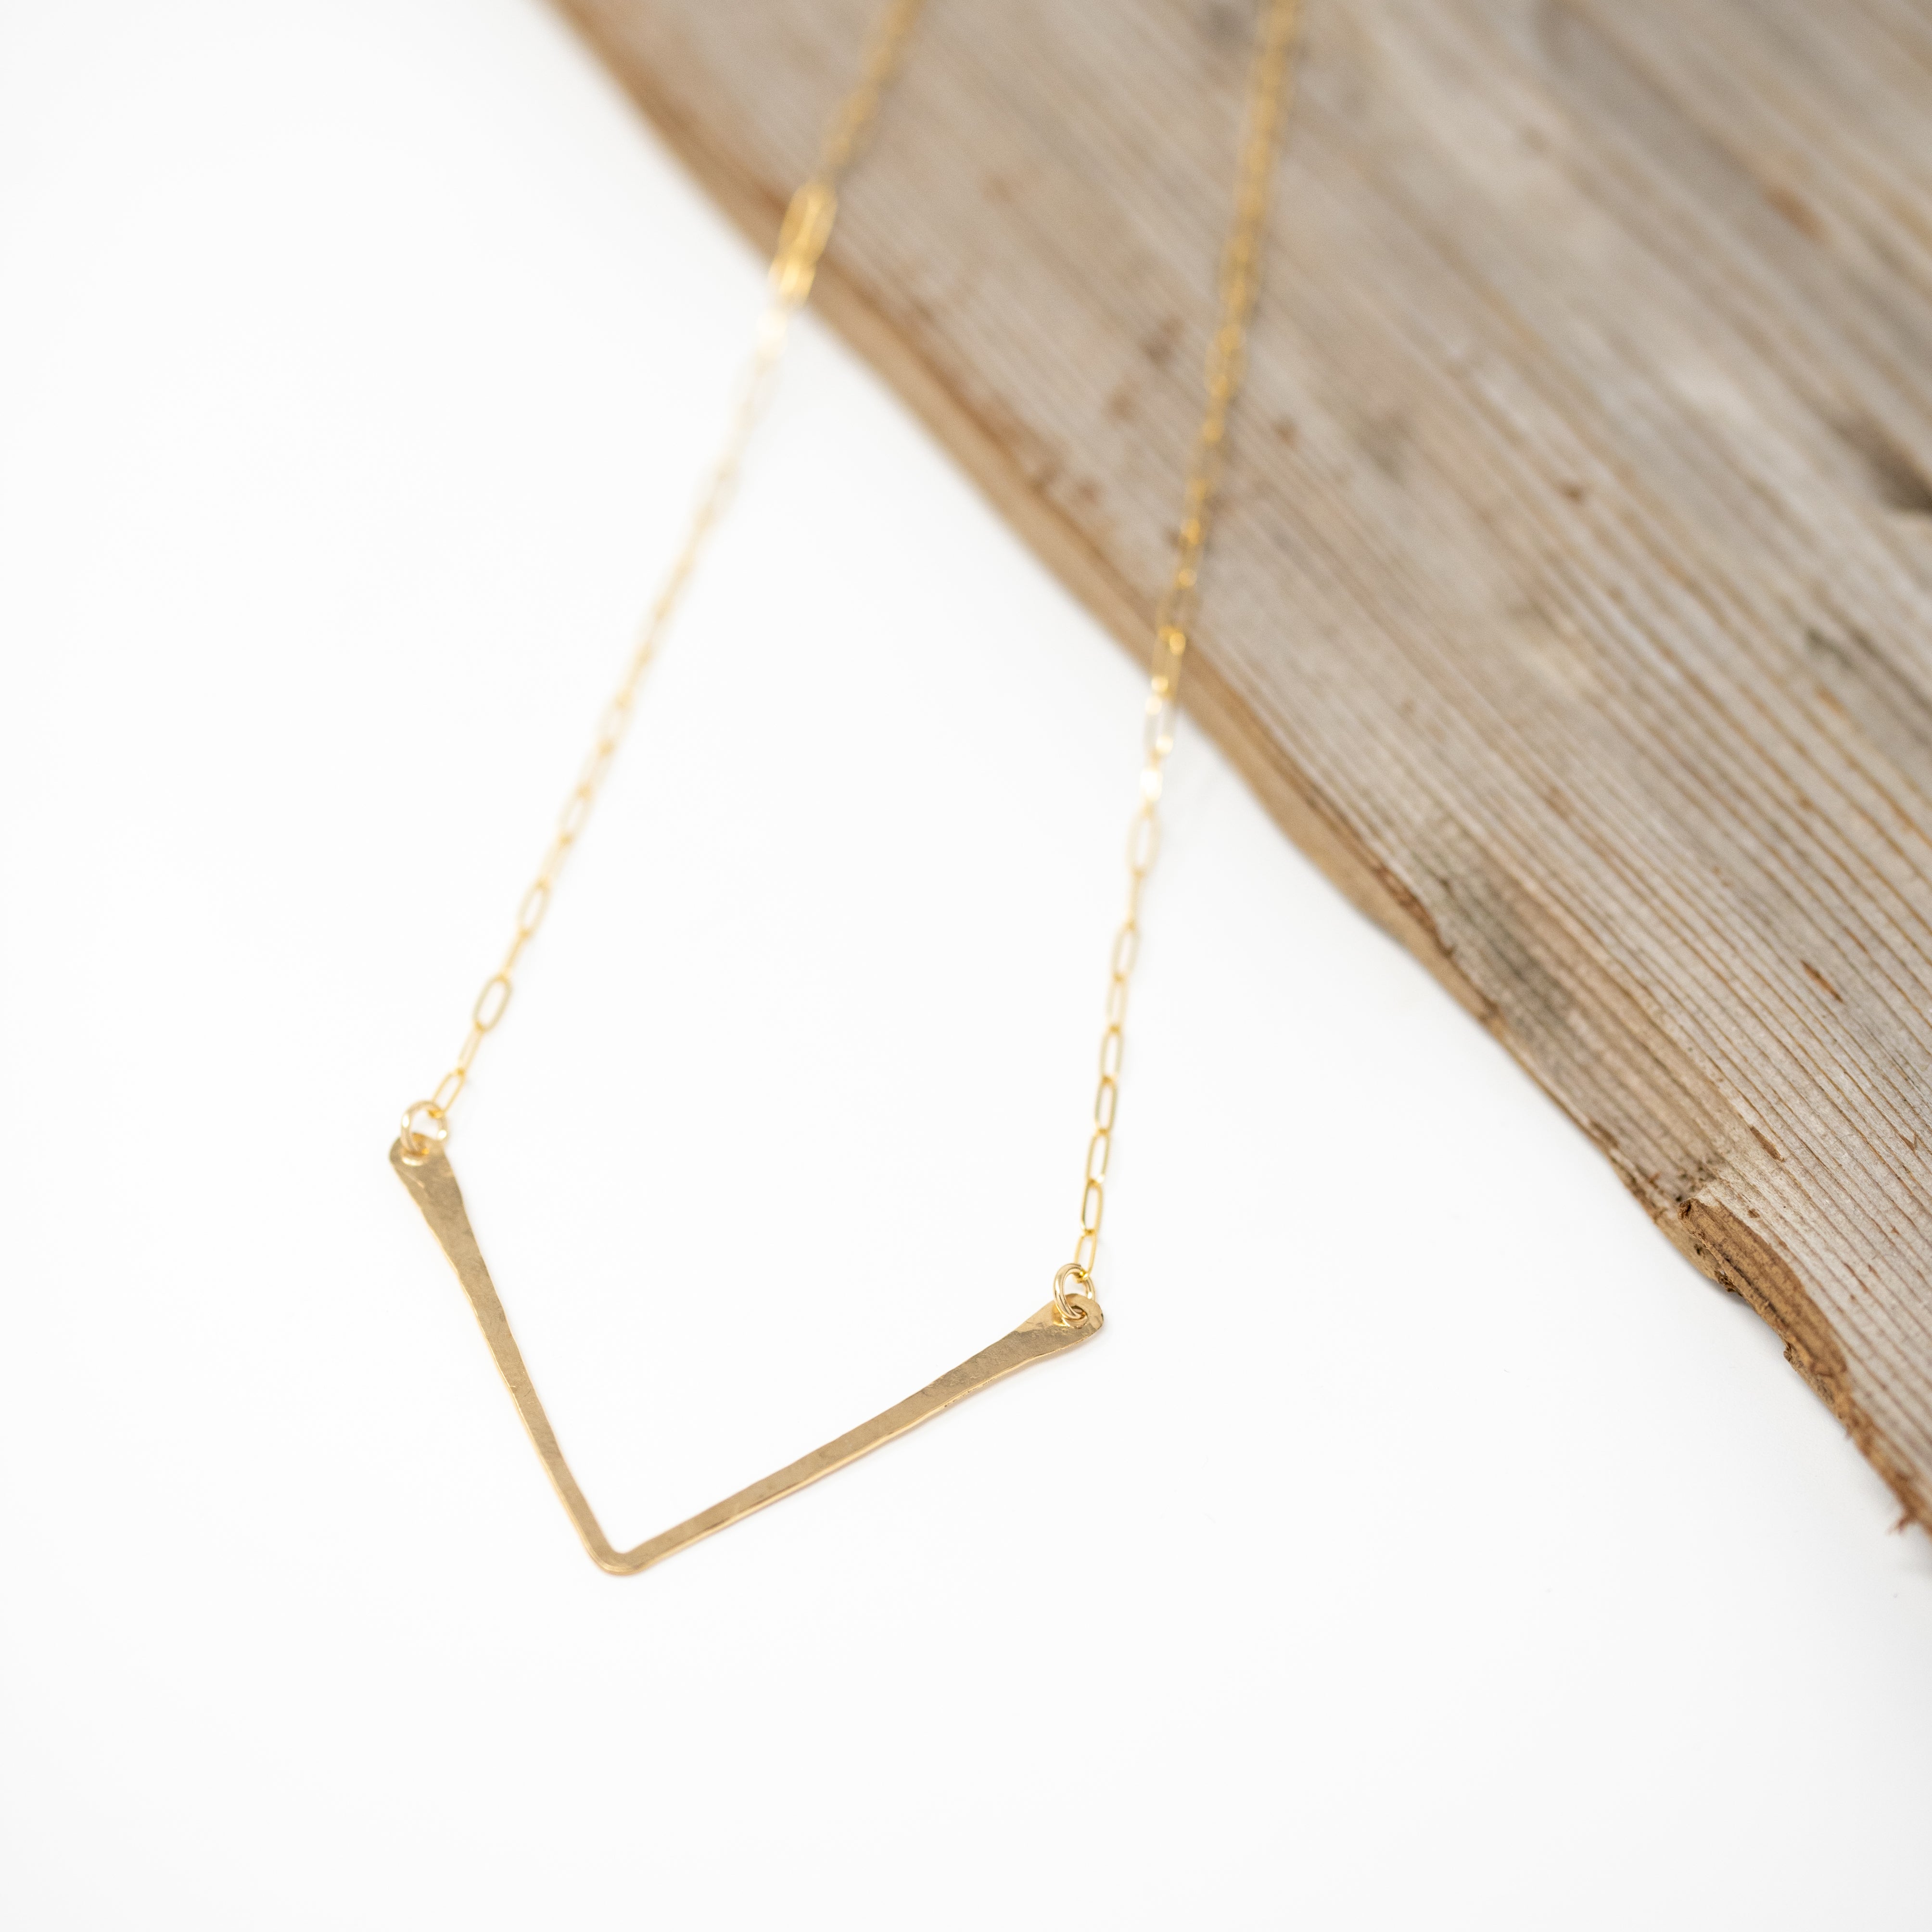 Hand forged V shaped gold bar attached to a gold chain.